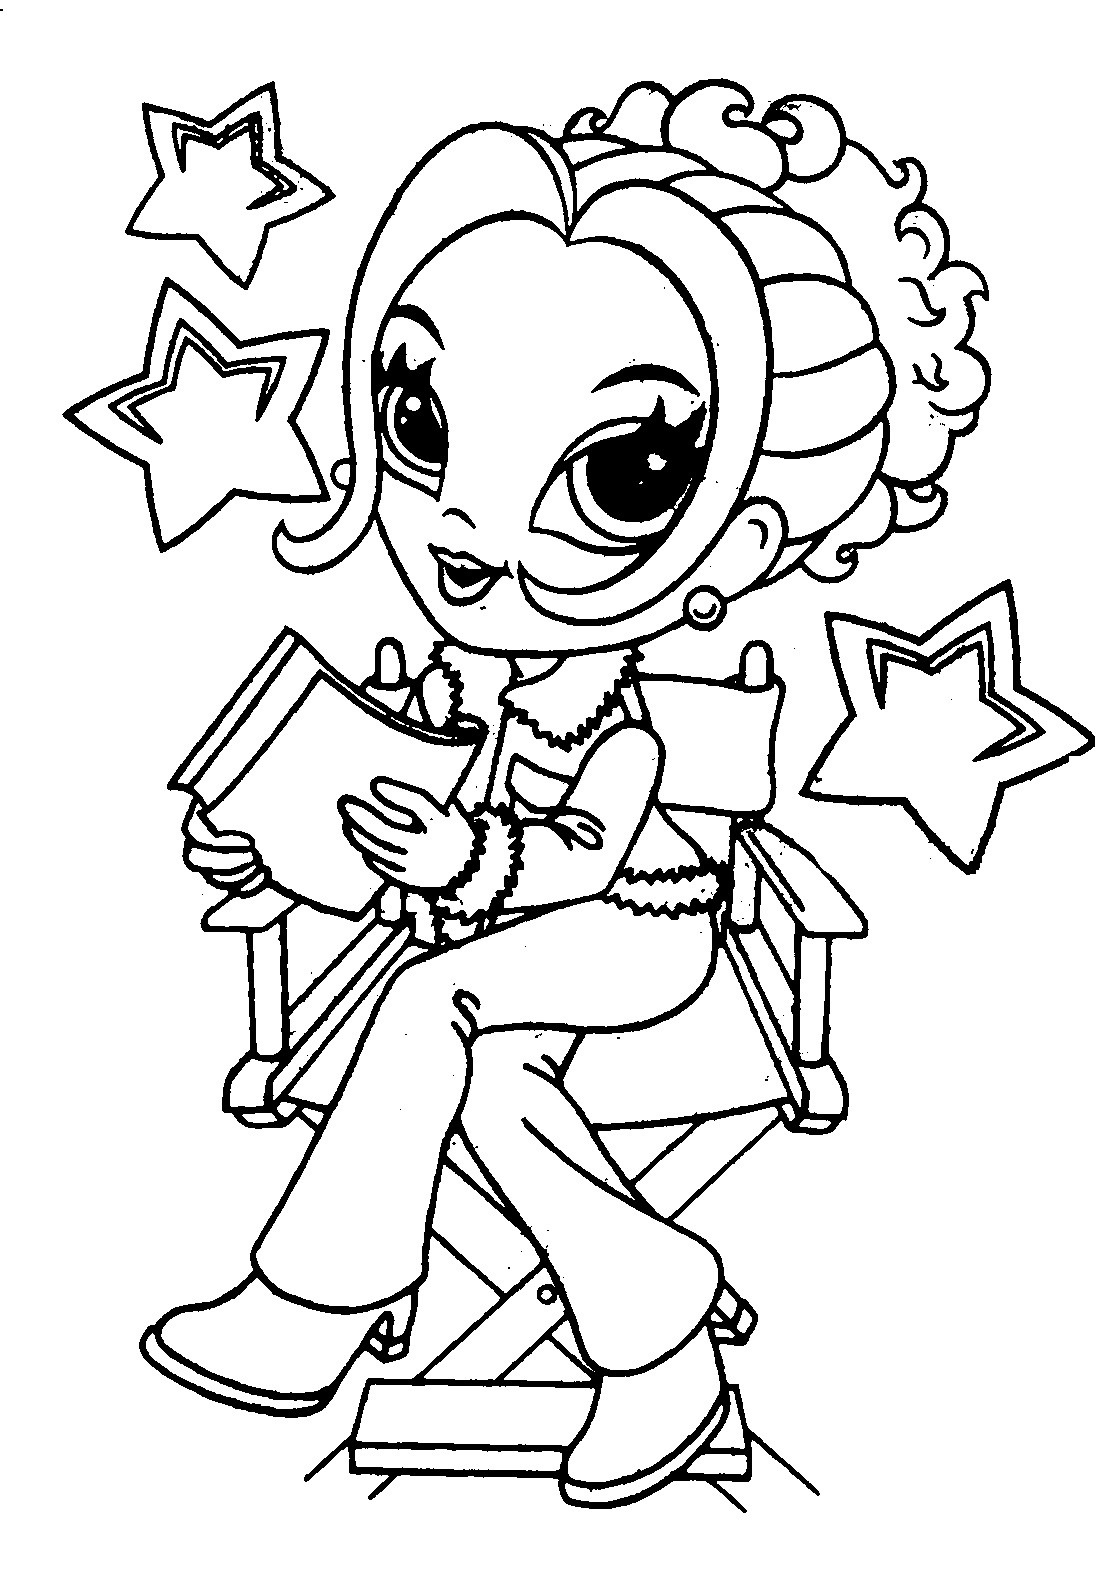 Coloring Pages For Girls (6) Coloring Kids - Coloring Kids